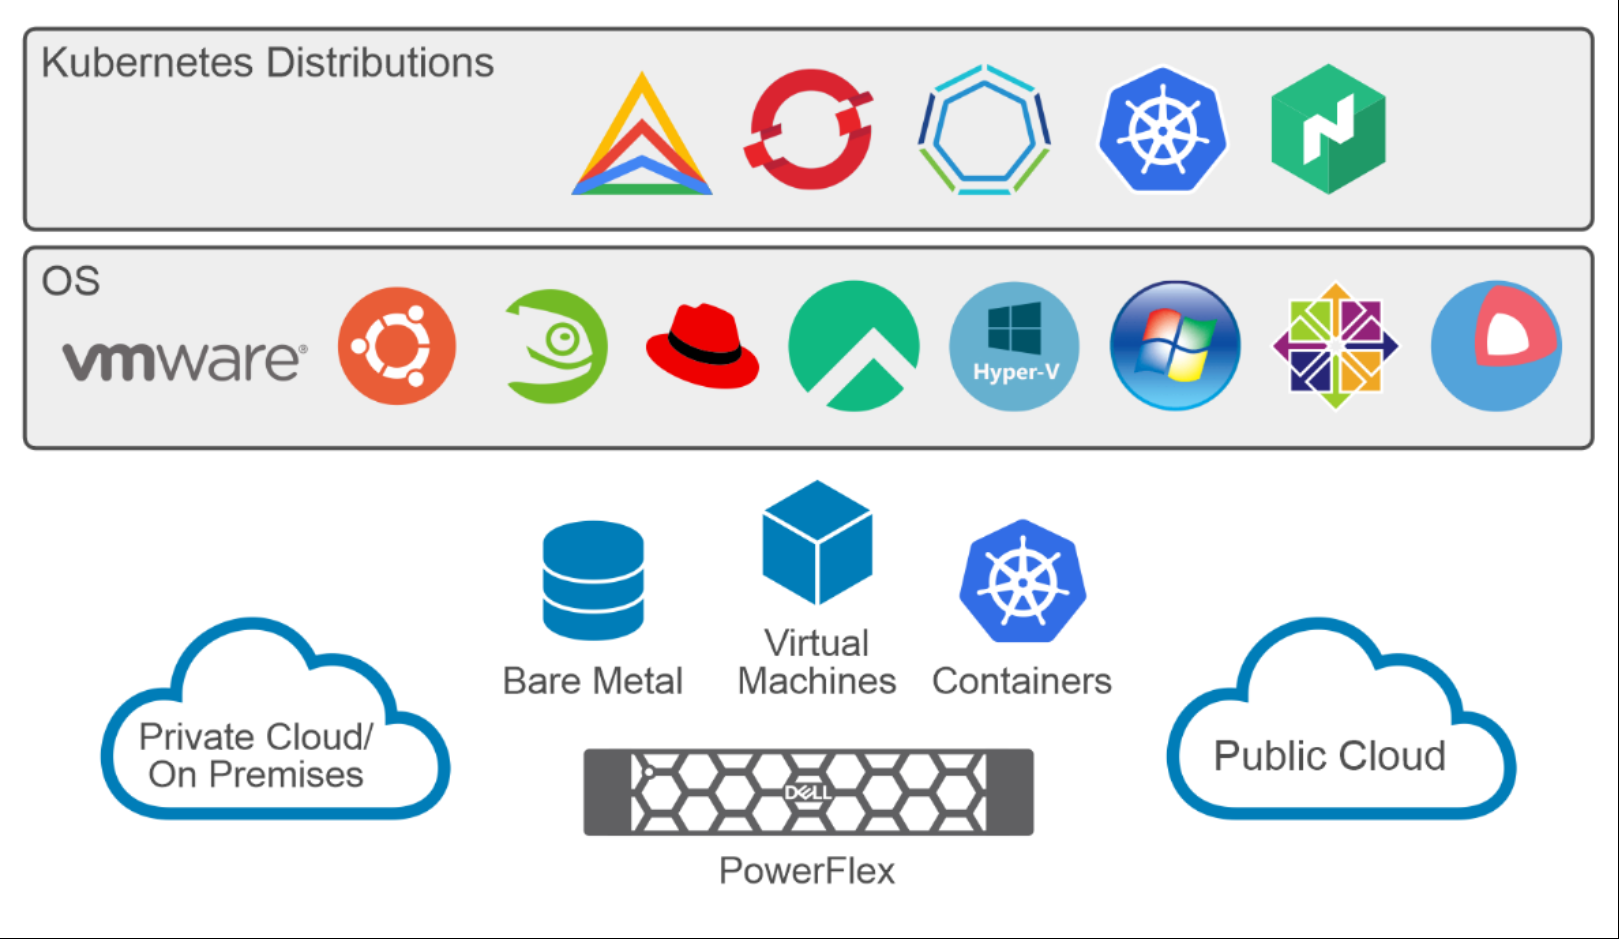 This figure shows the Powerflex architecture for different Kubernetes distributions.